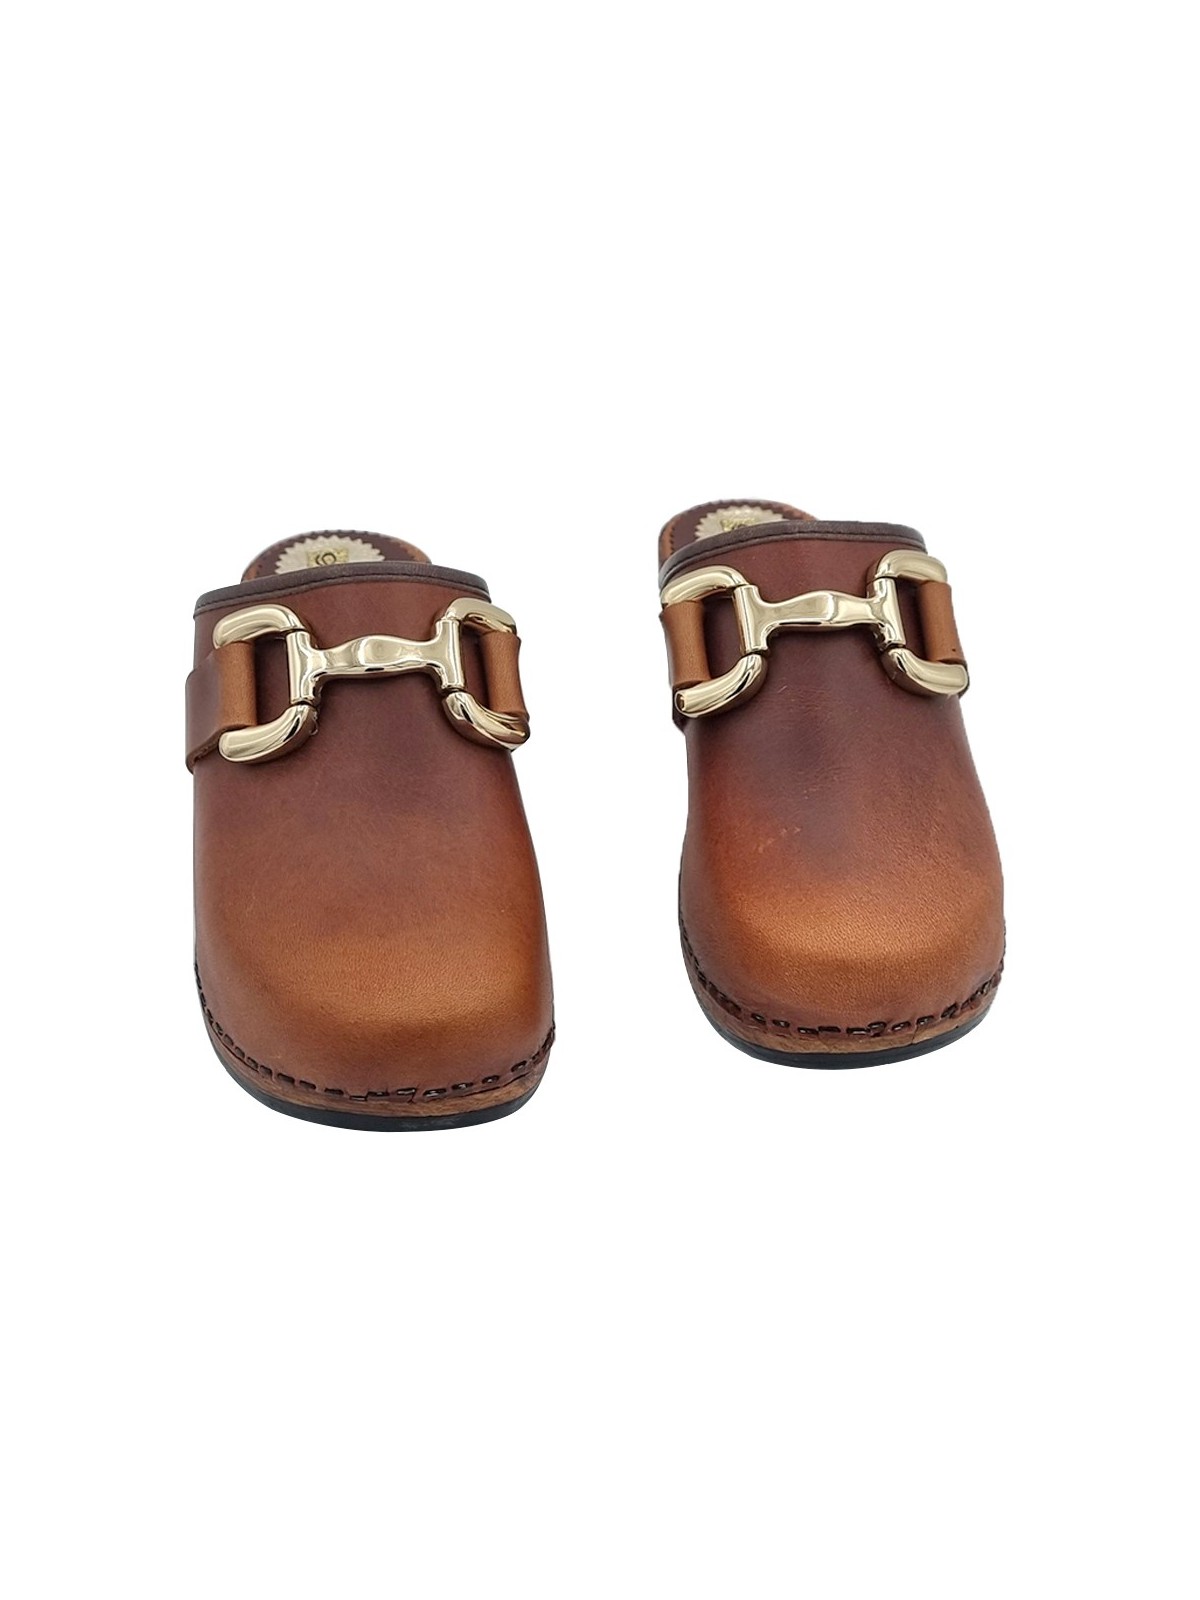 DUTCH CLOGS WITH GOLD ACCESSORY